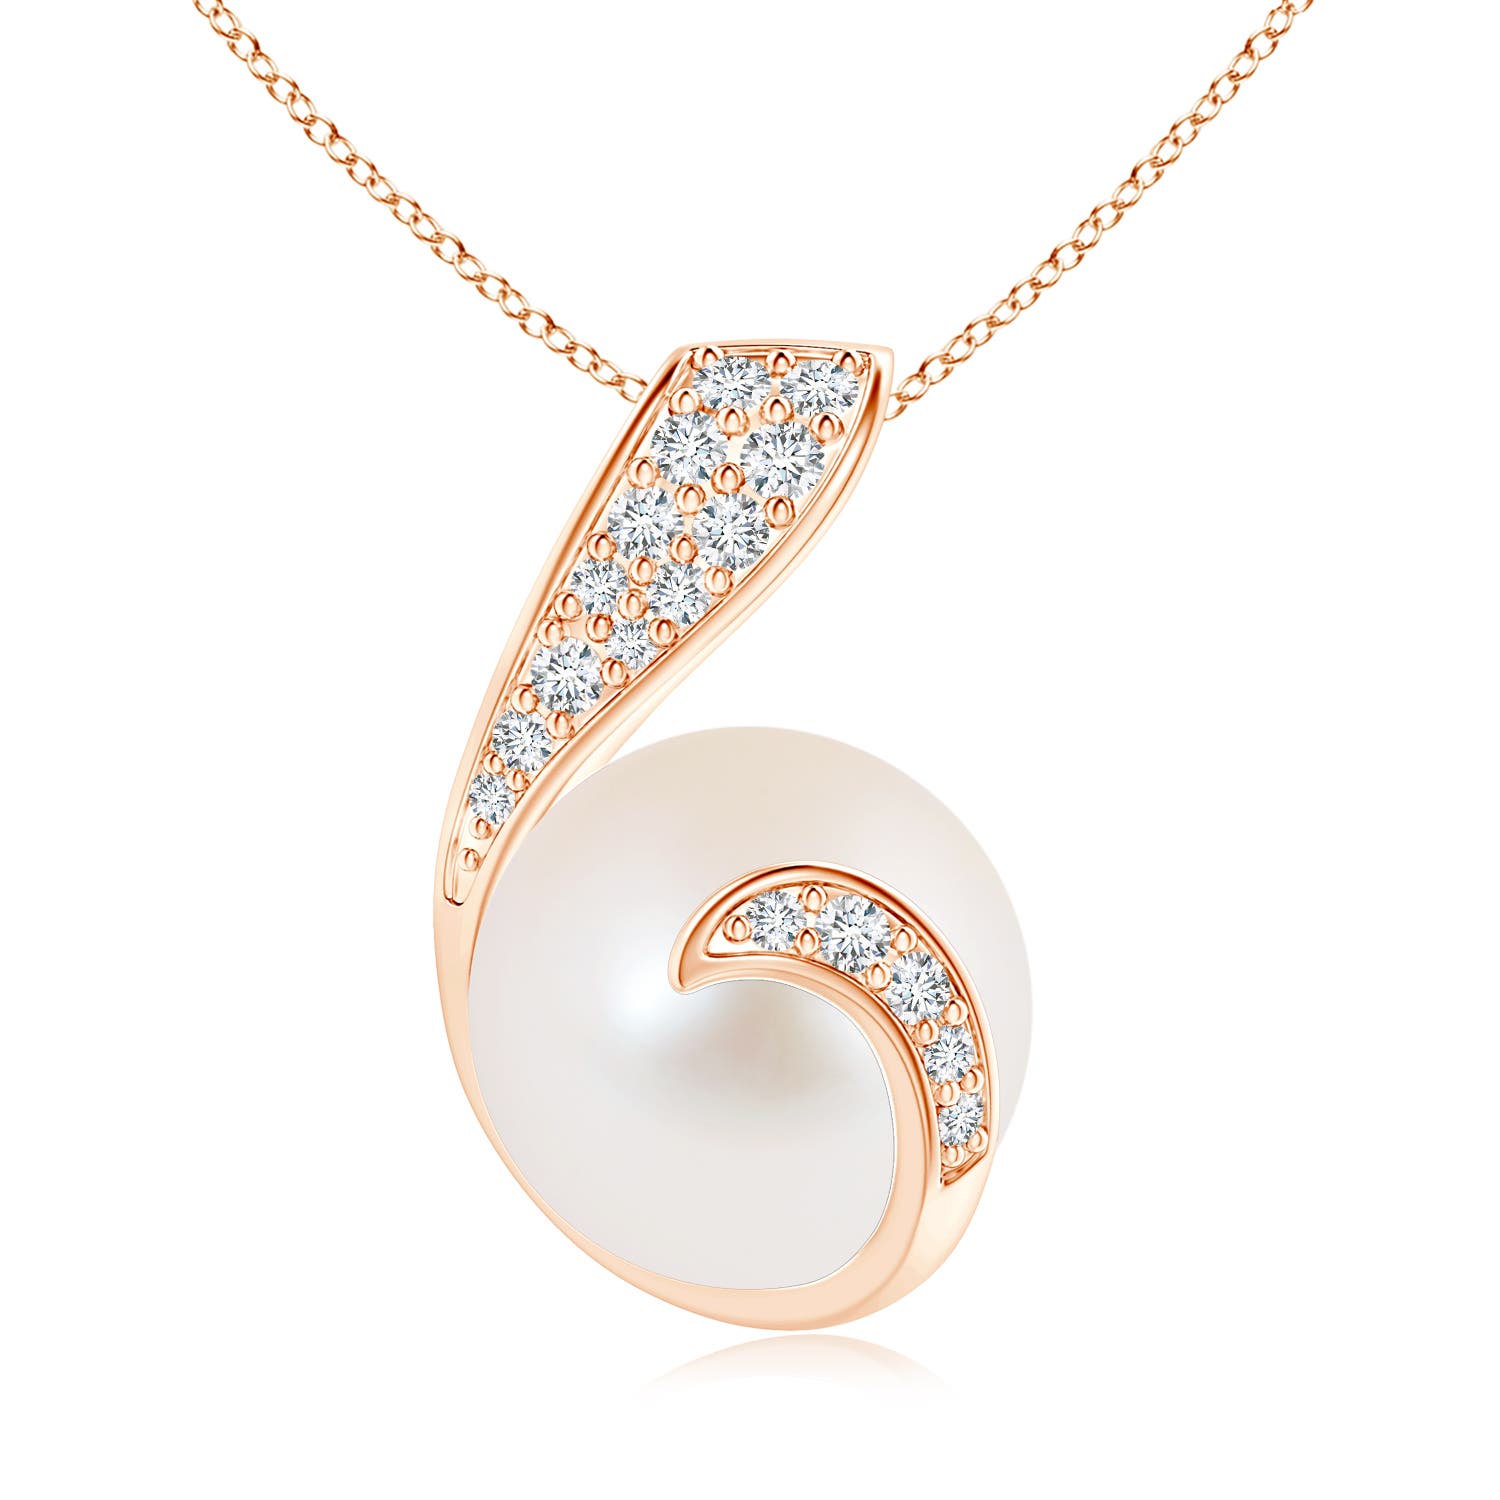 Buy Freshwater Pearl Solitaire Pendant Necklaces in UK | Angara